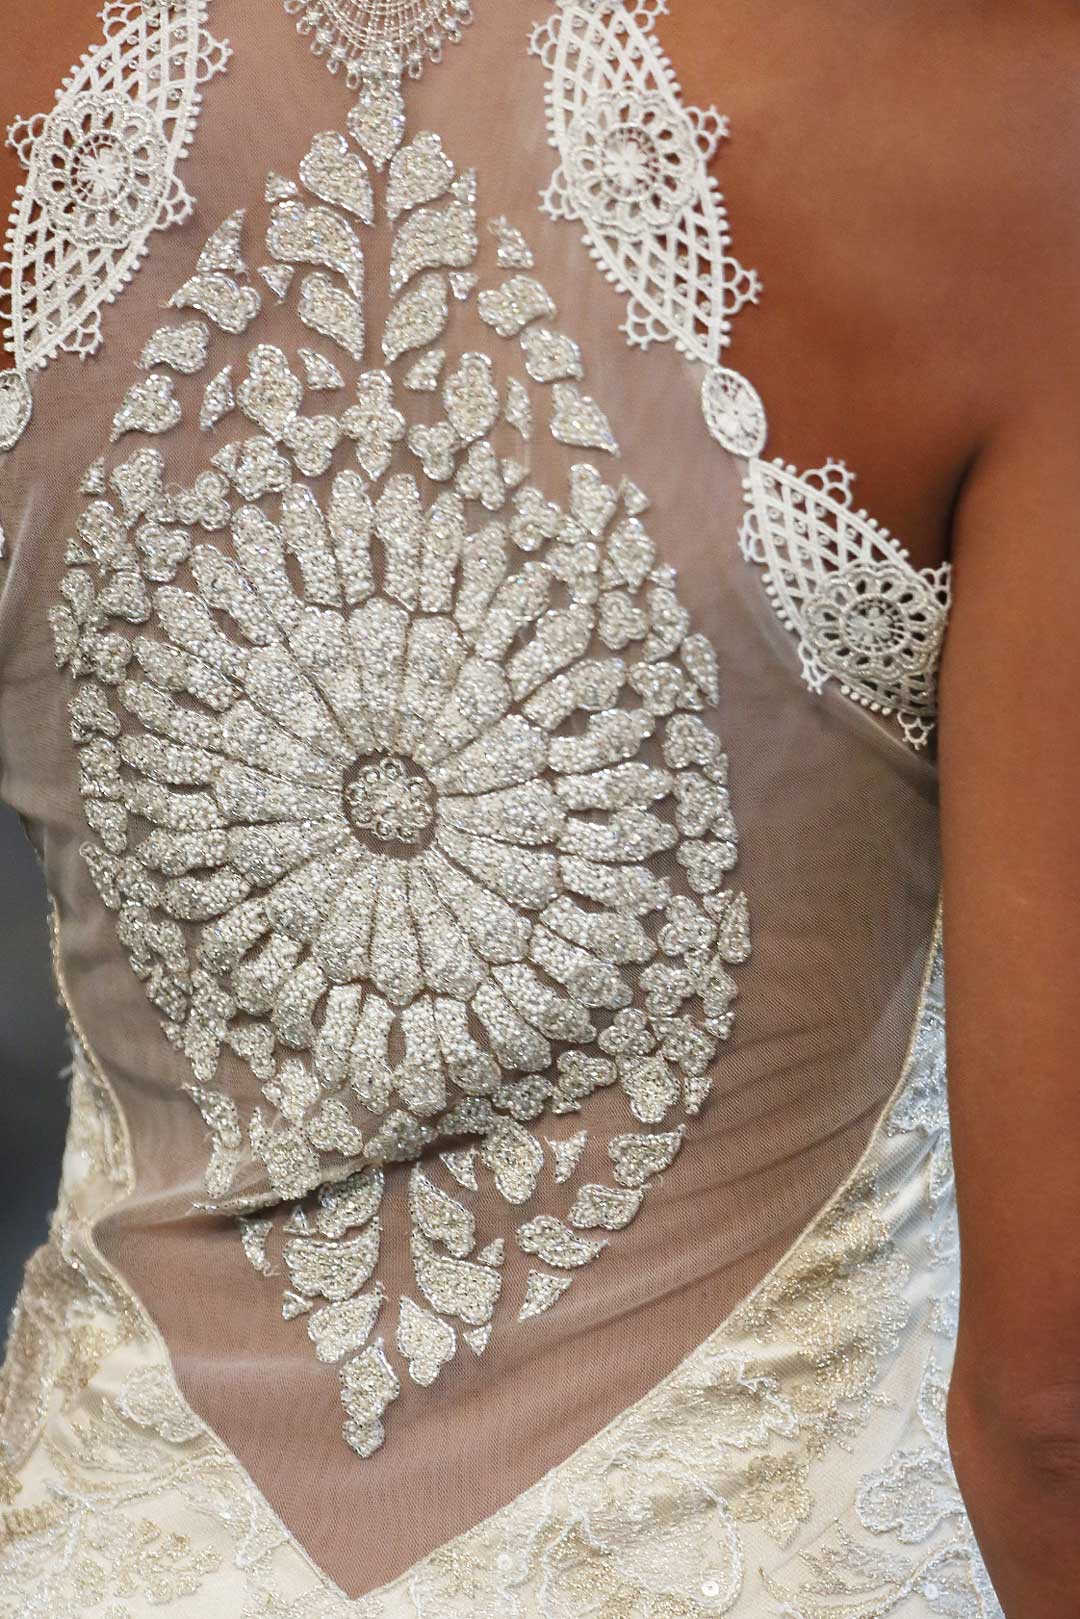 Back Halter Wedding Dress with Beaded Applique Designed by Claire Pettibone